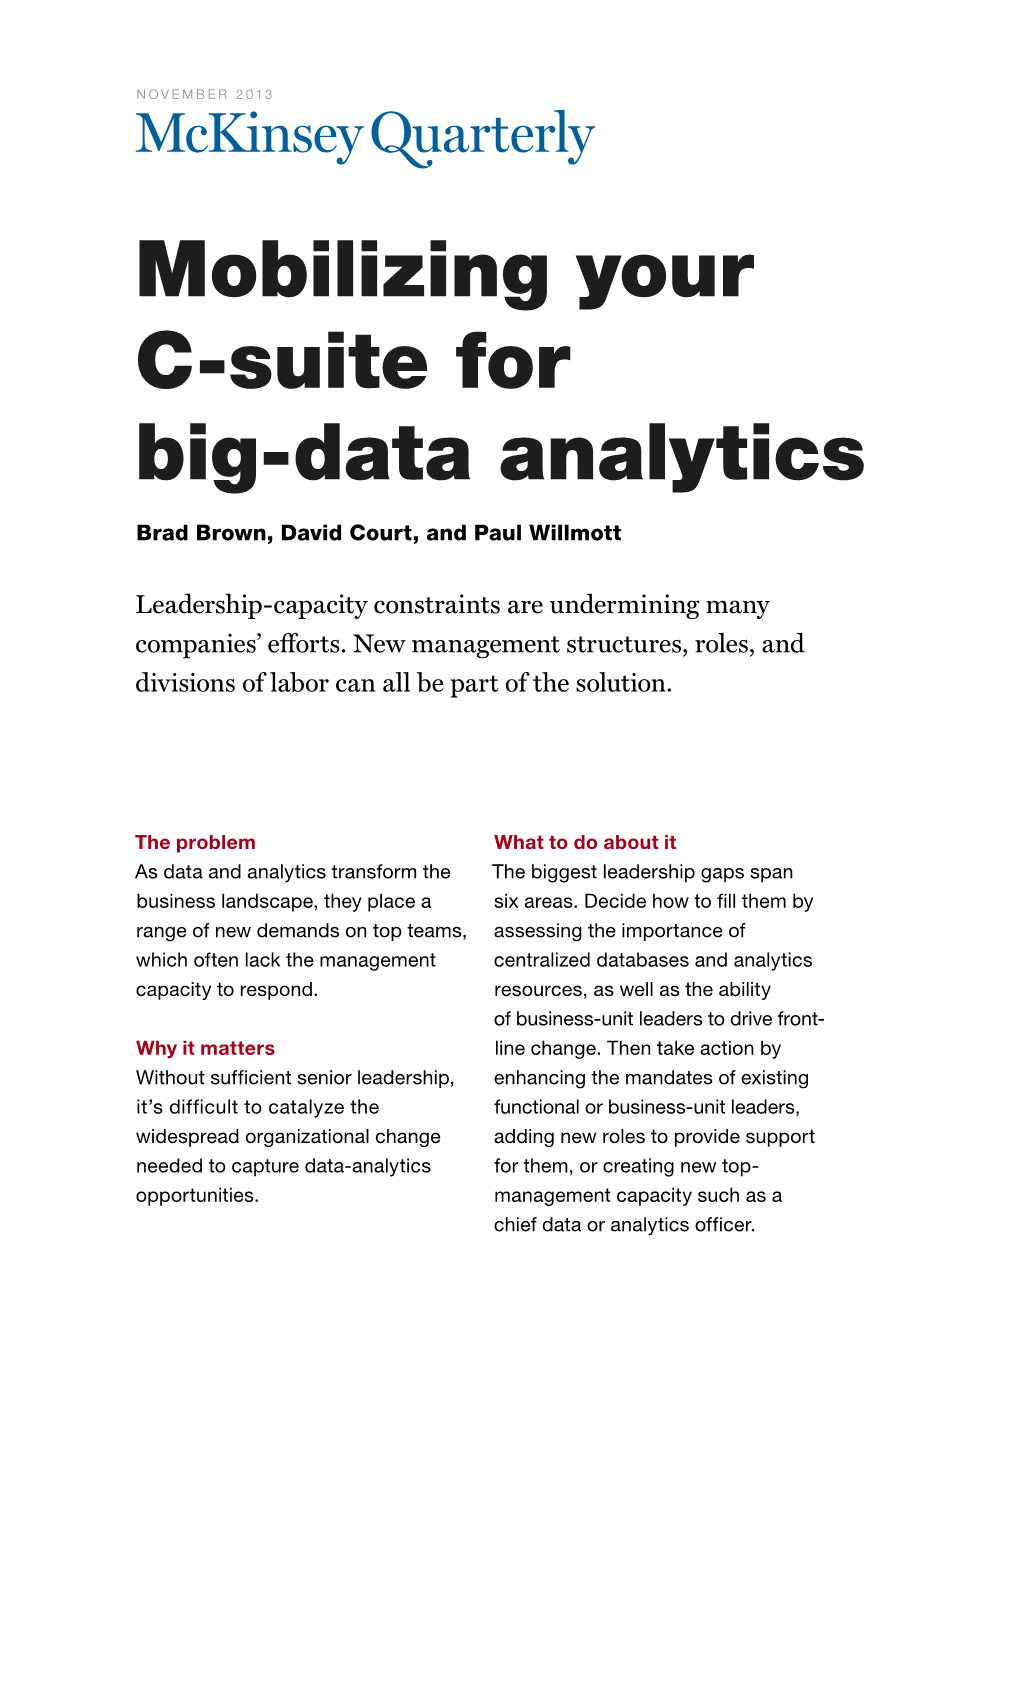 Mobilizing Your C-Suite for Big-Data Analytics